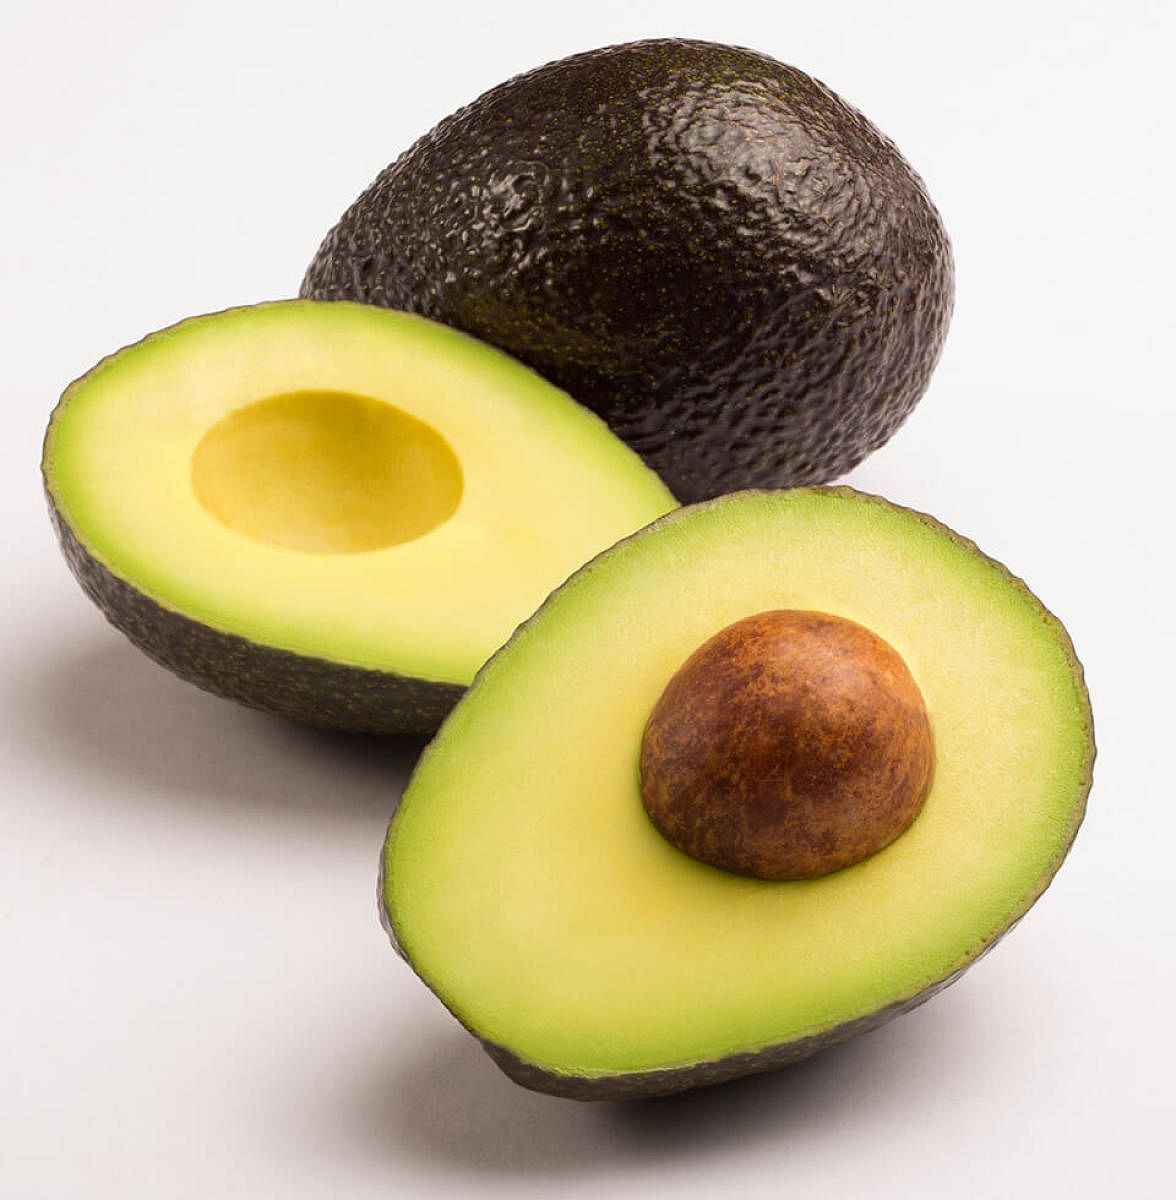 Avocados are rich in potassium and can help reduce period bloating